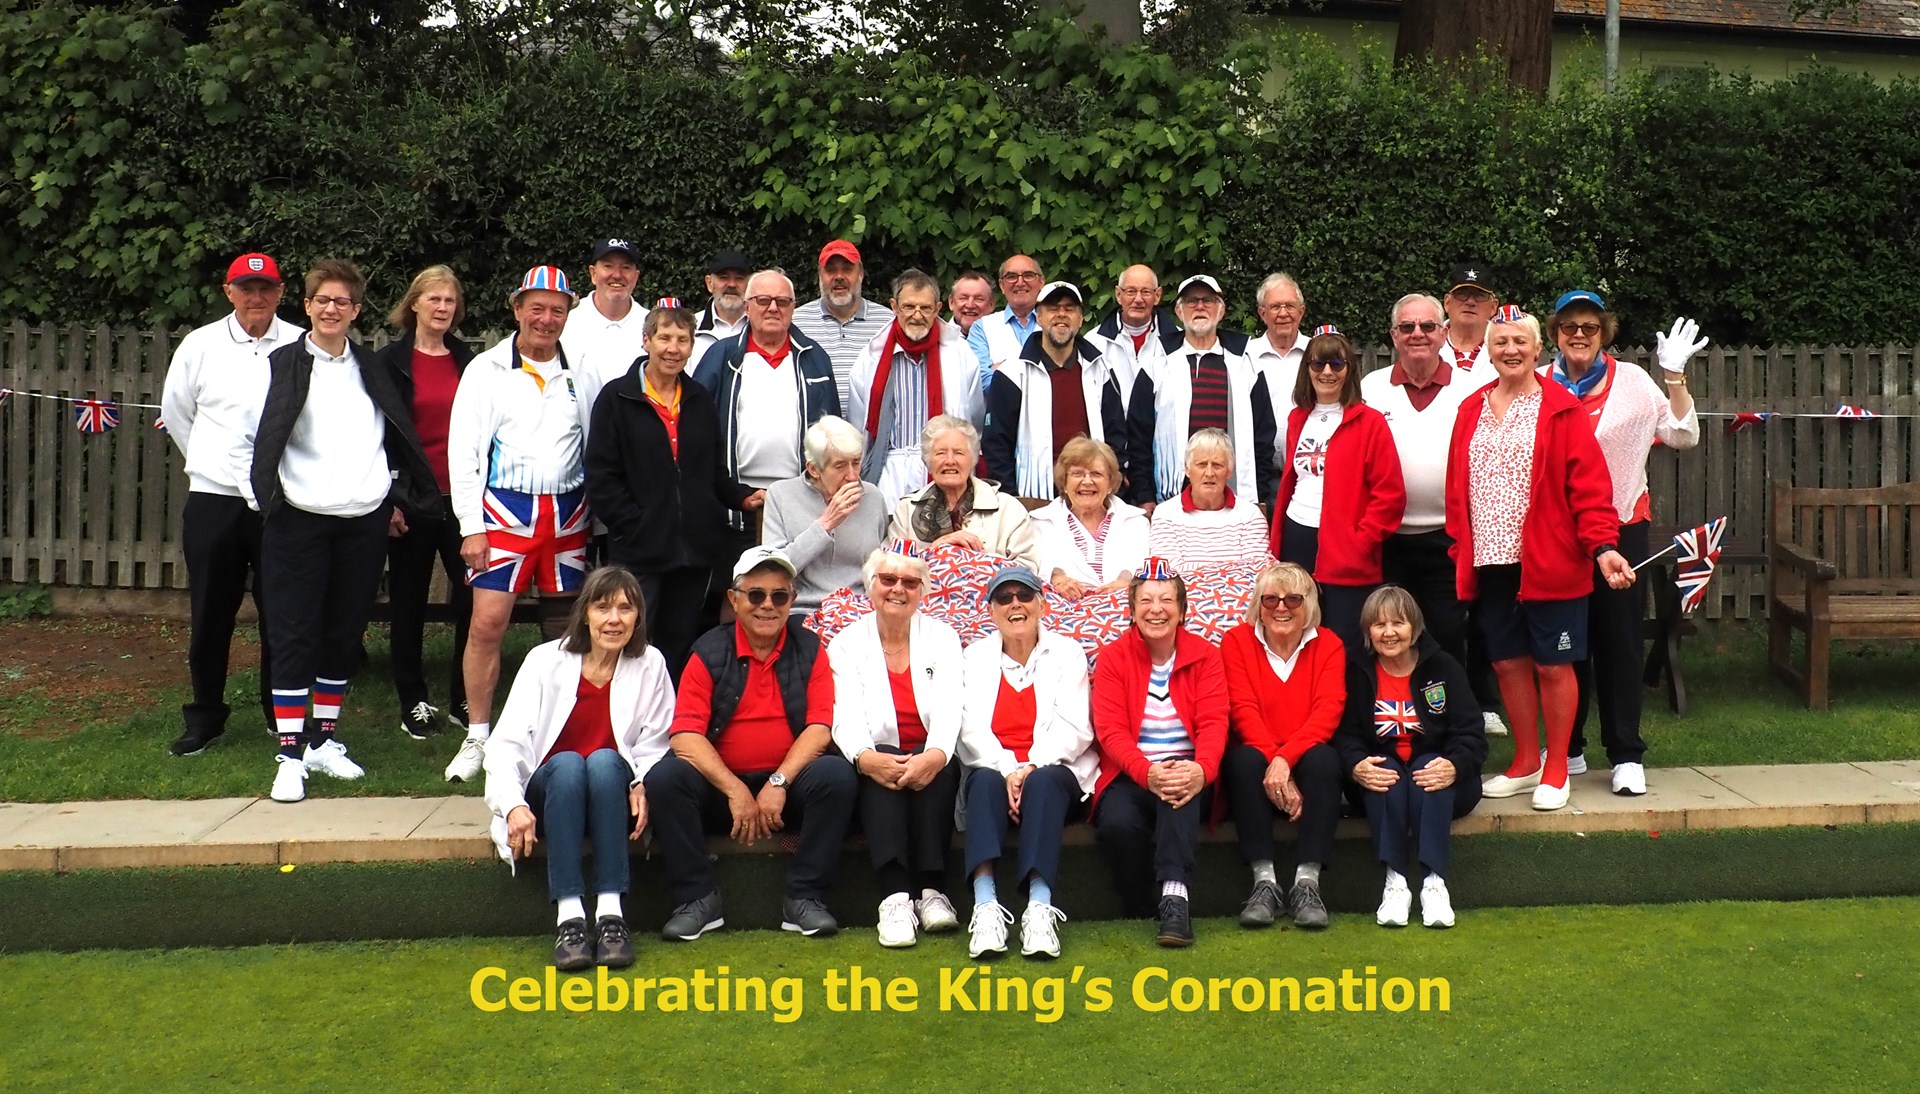 A fun afternoon celebrating the King's Coronation